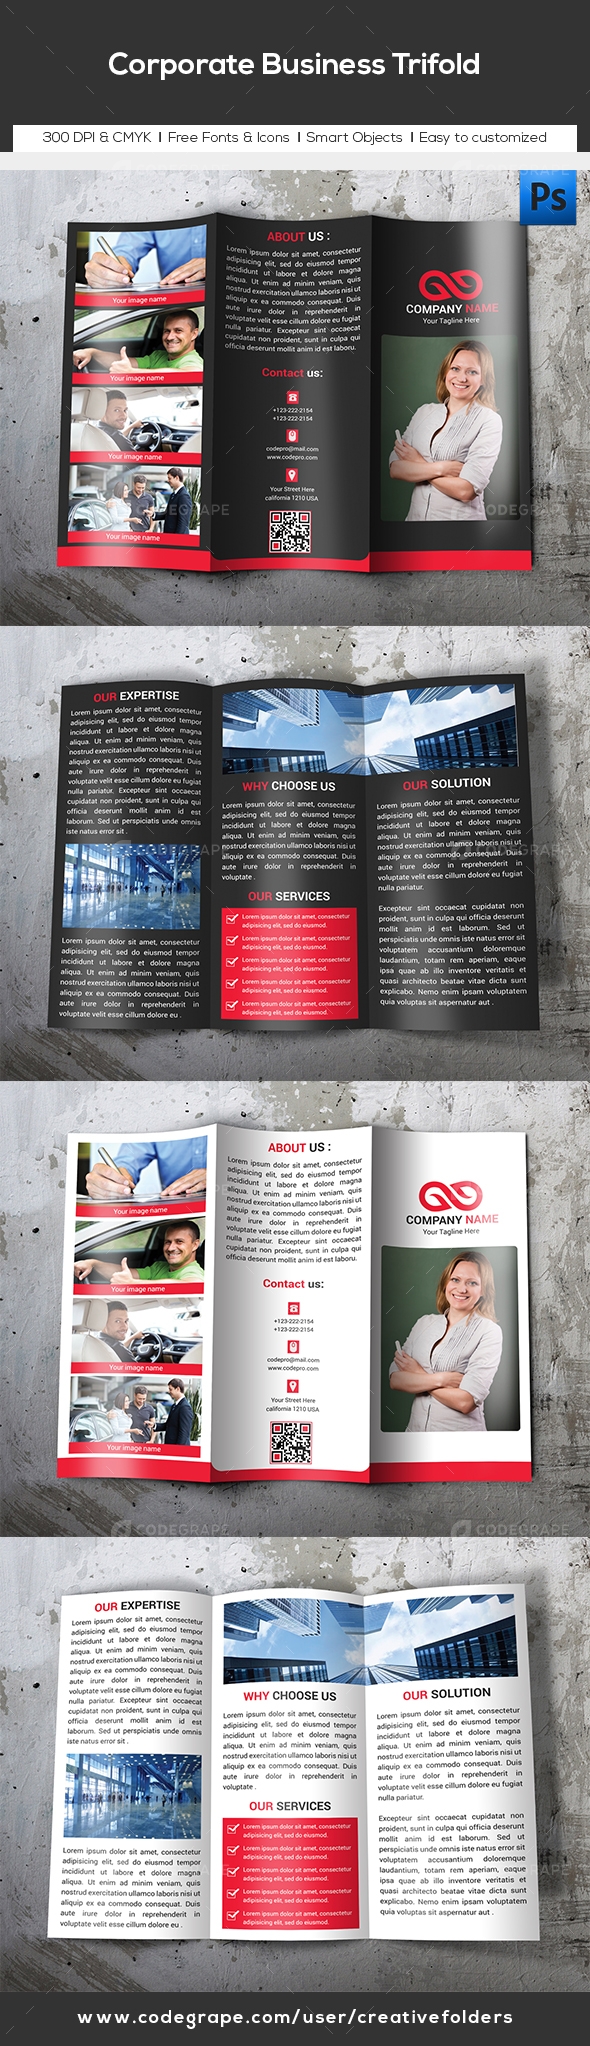 Corporate Business Trifold